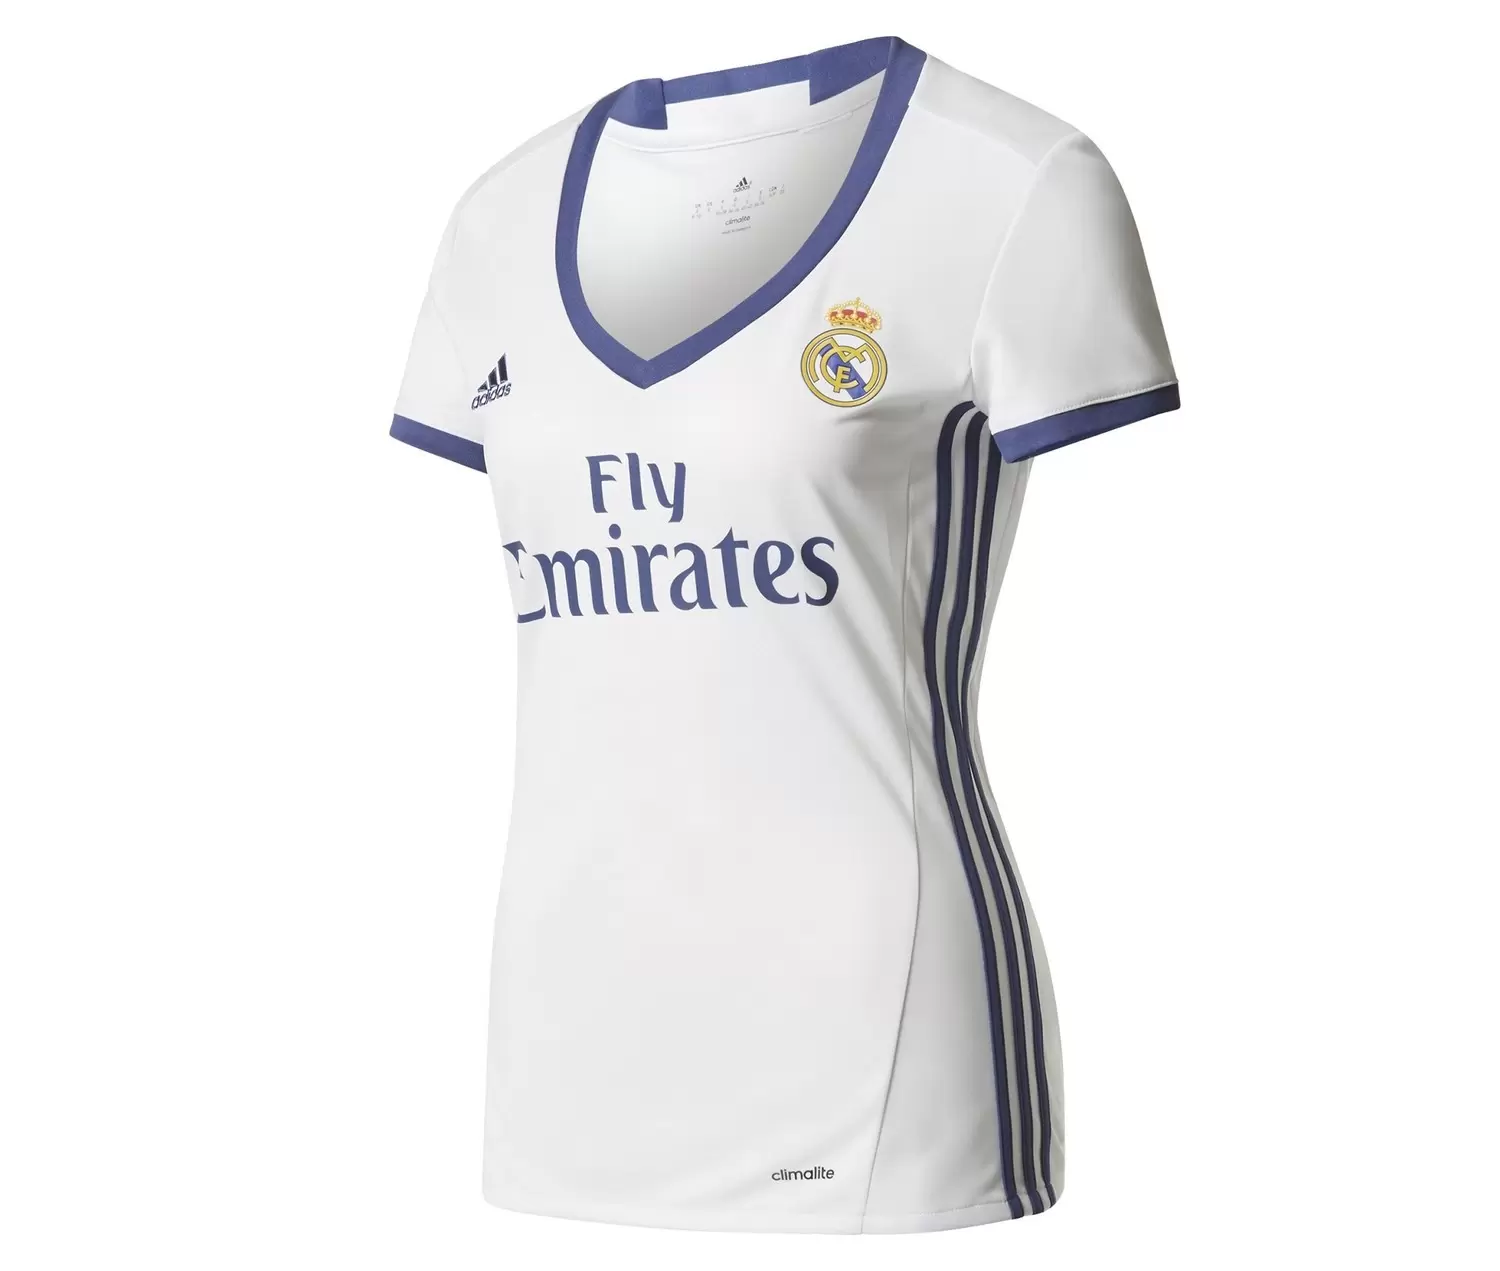 Maillot de football - Supportrice Real Madrid Domicile 2016/2017 Blanc Femme